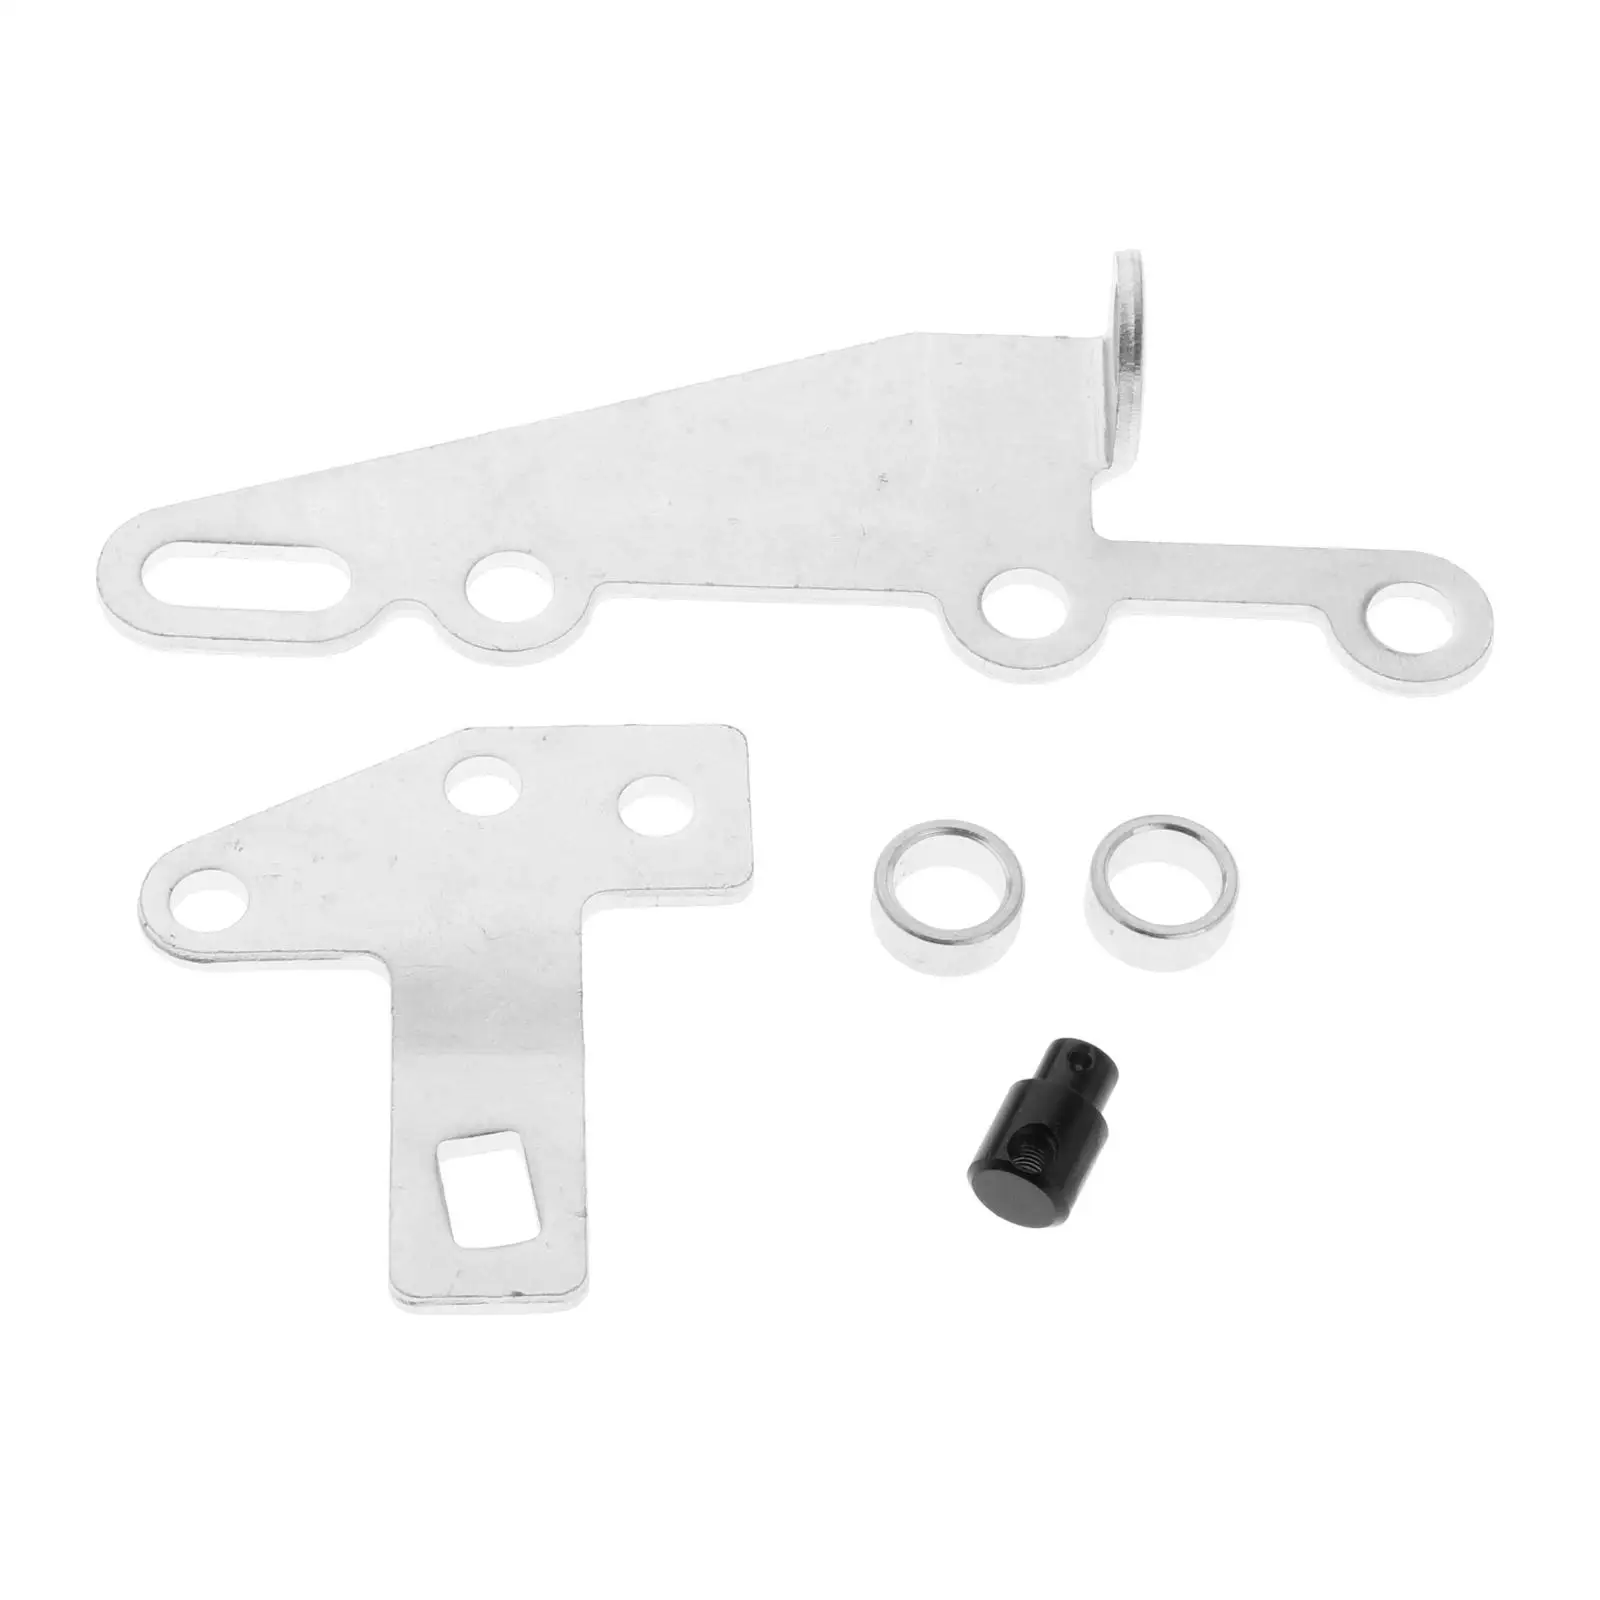 Bracket & Lever Kit Fits for TH400 TH350 TH250 700R4 Automatic Transmissions